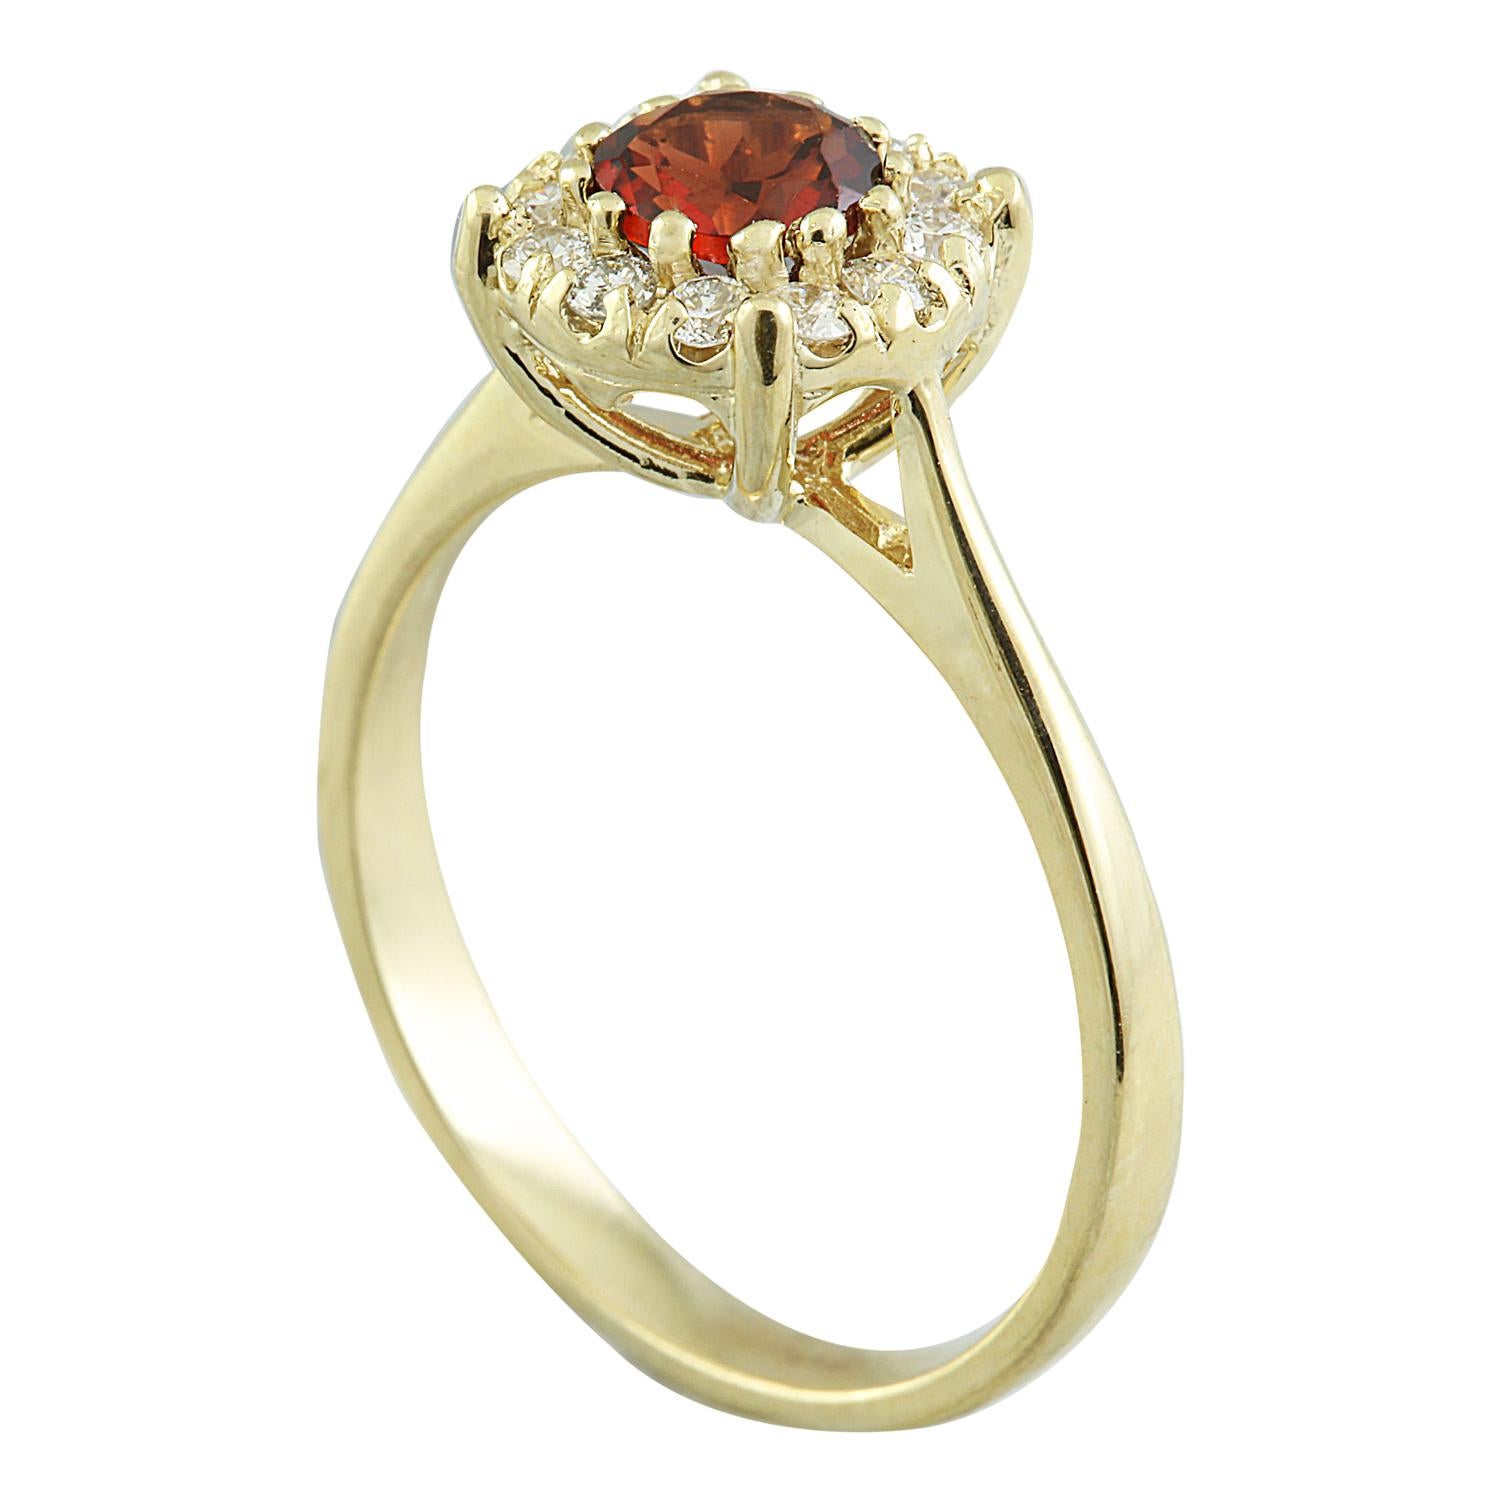 Natural Garnet Diamond Ring In 14 Karat Yellow Gold In New Condition For Sale In Los Angeles, CA